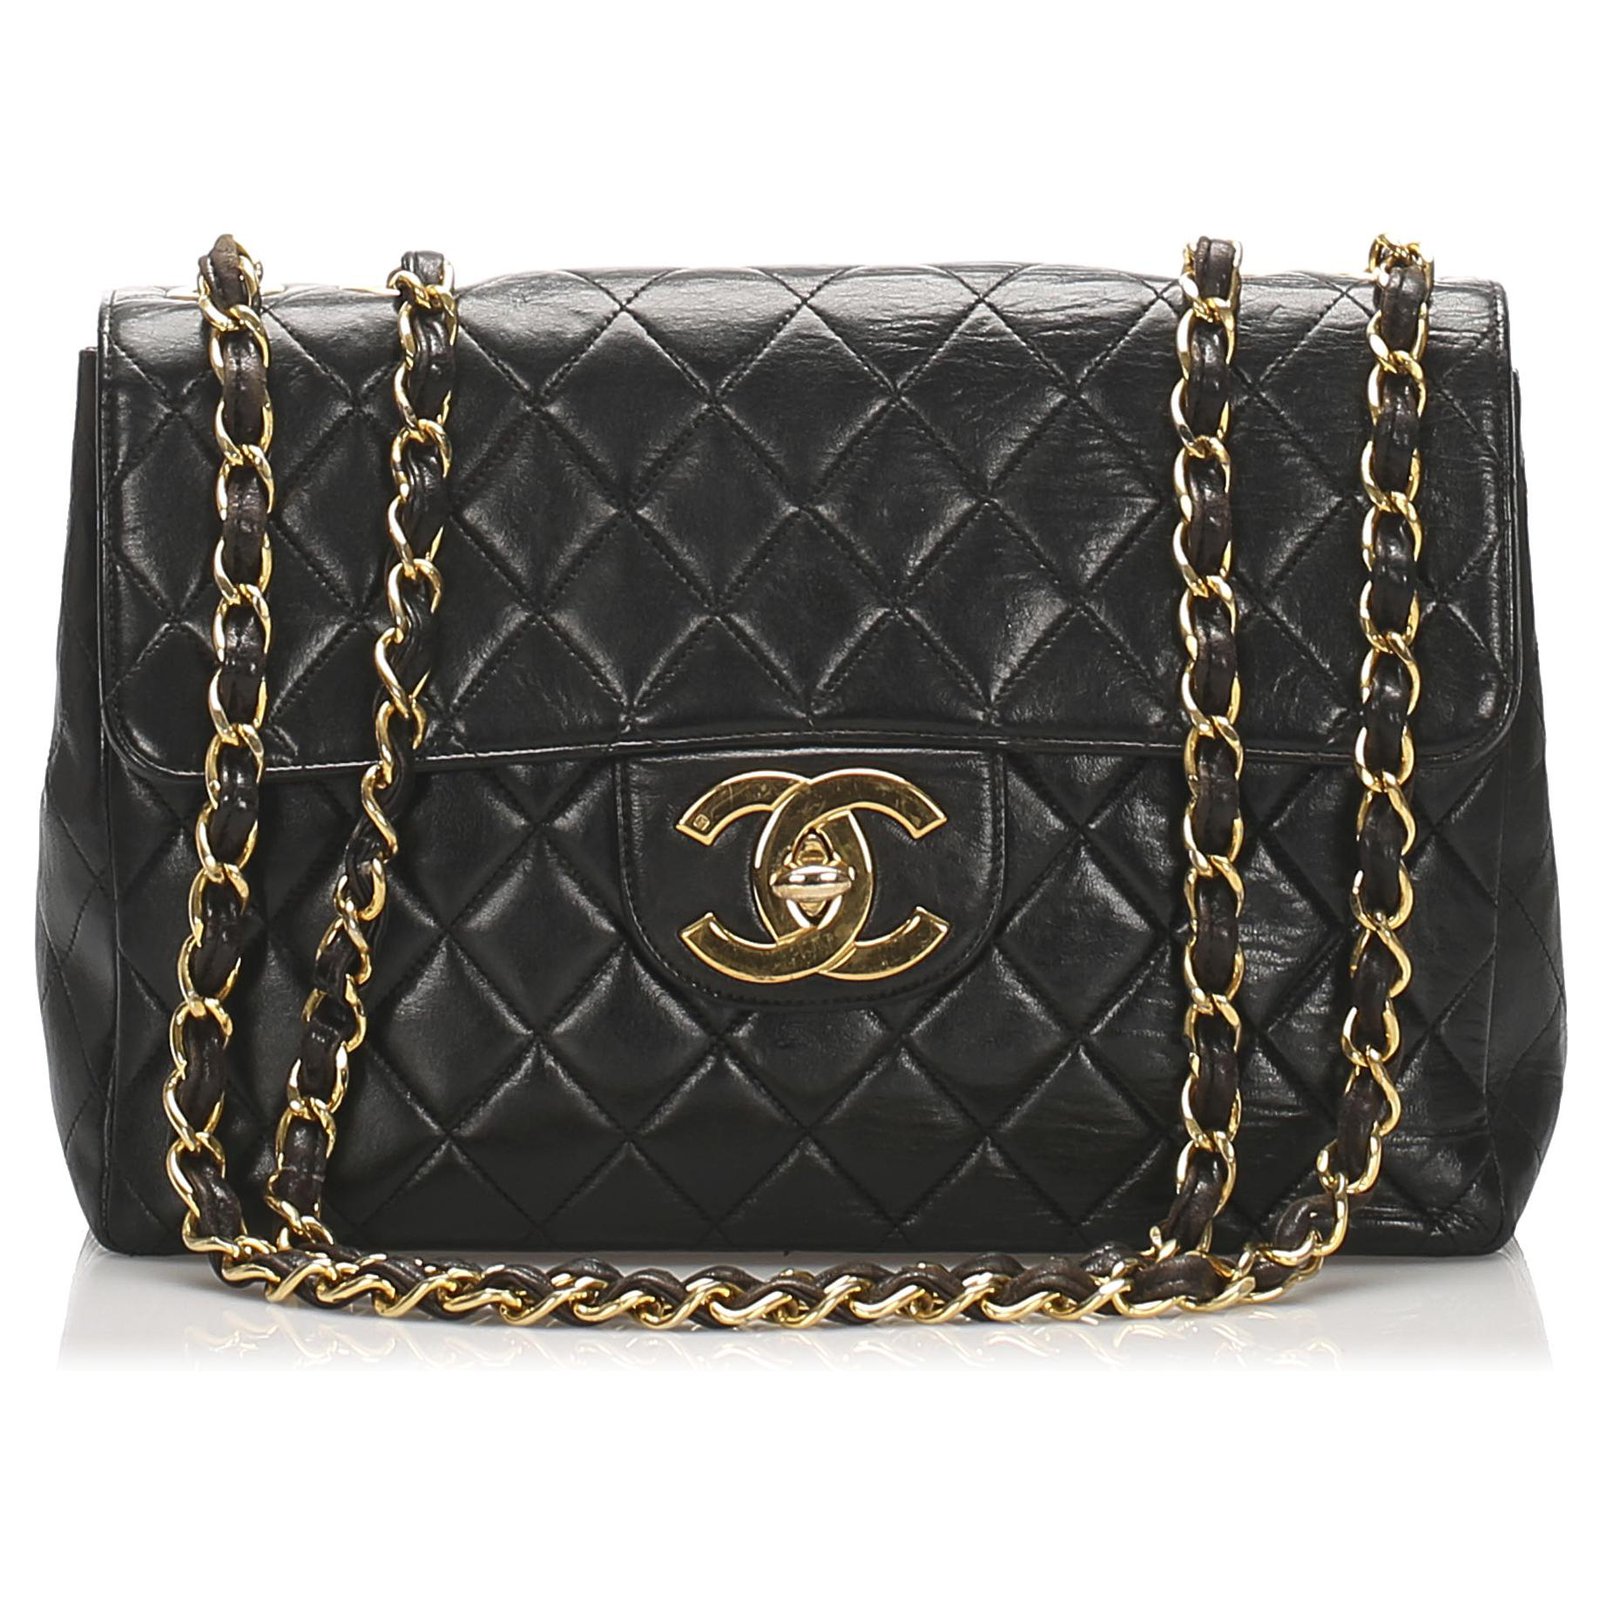 Chanel Vintage Quilted Jumbo Classic Flap Bag